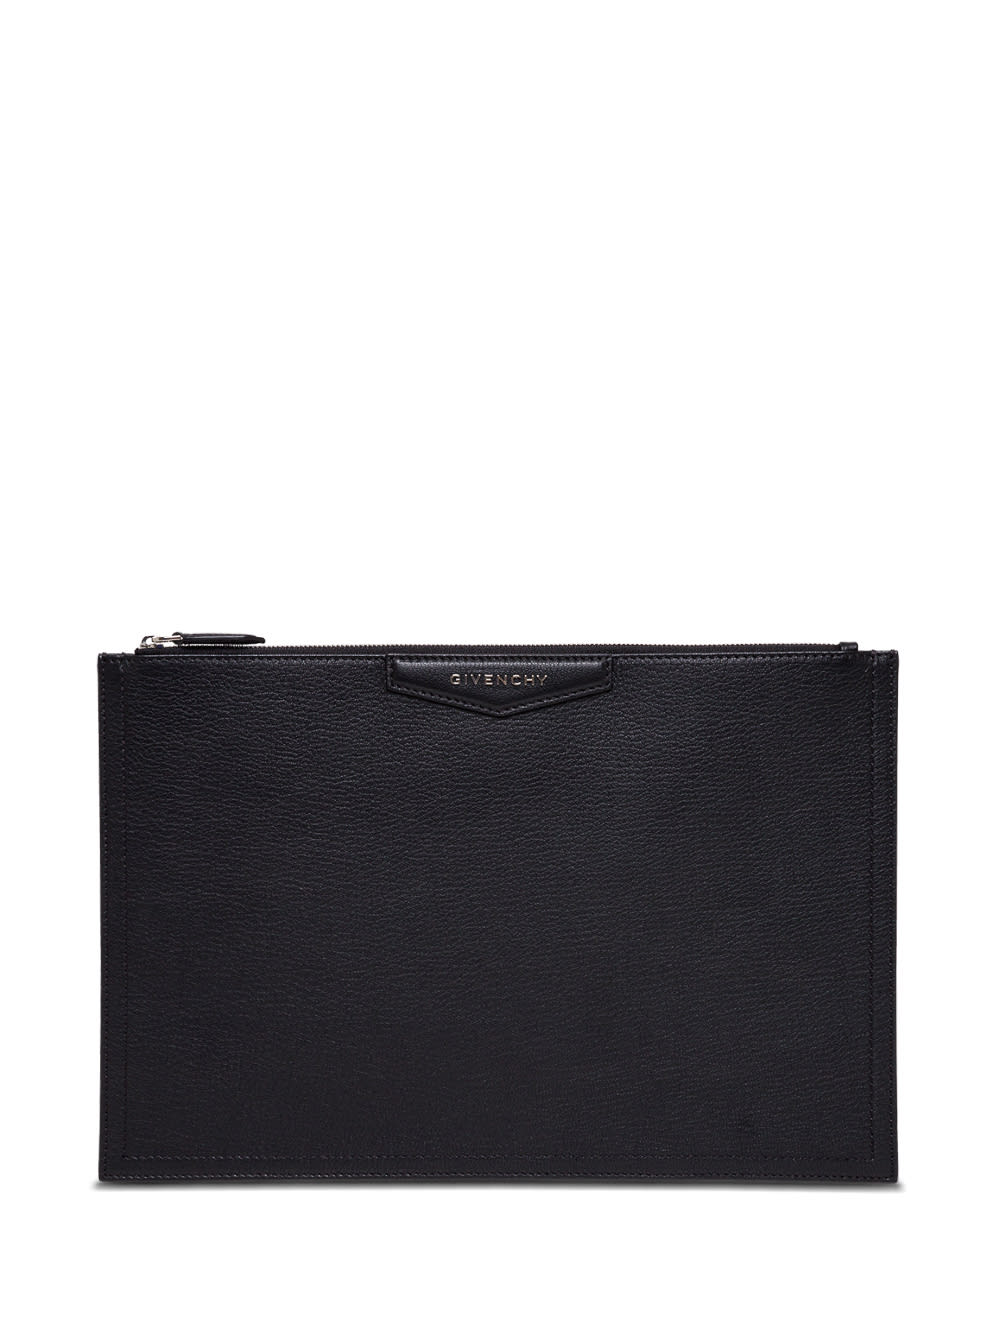 Givenchy Clutch In Black Hammered Leather